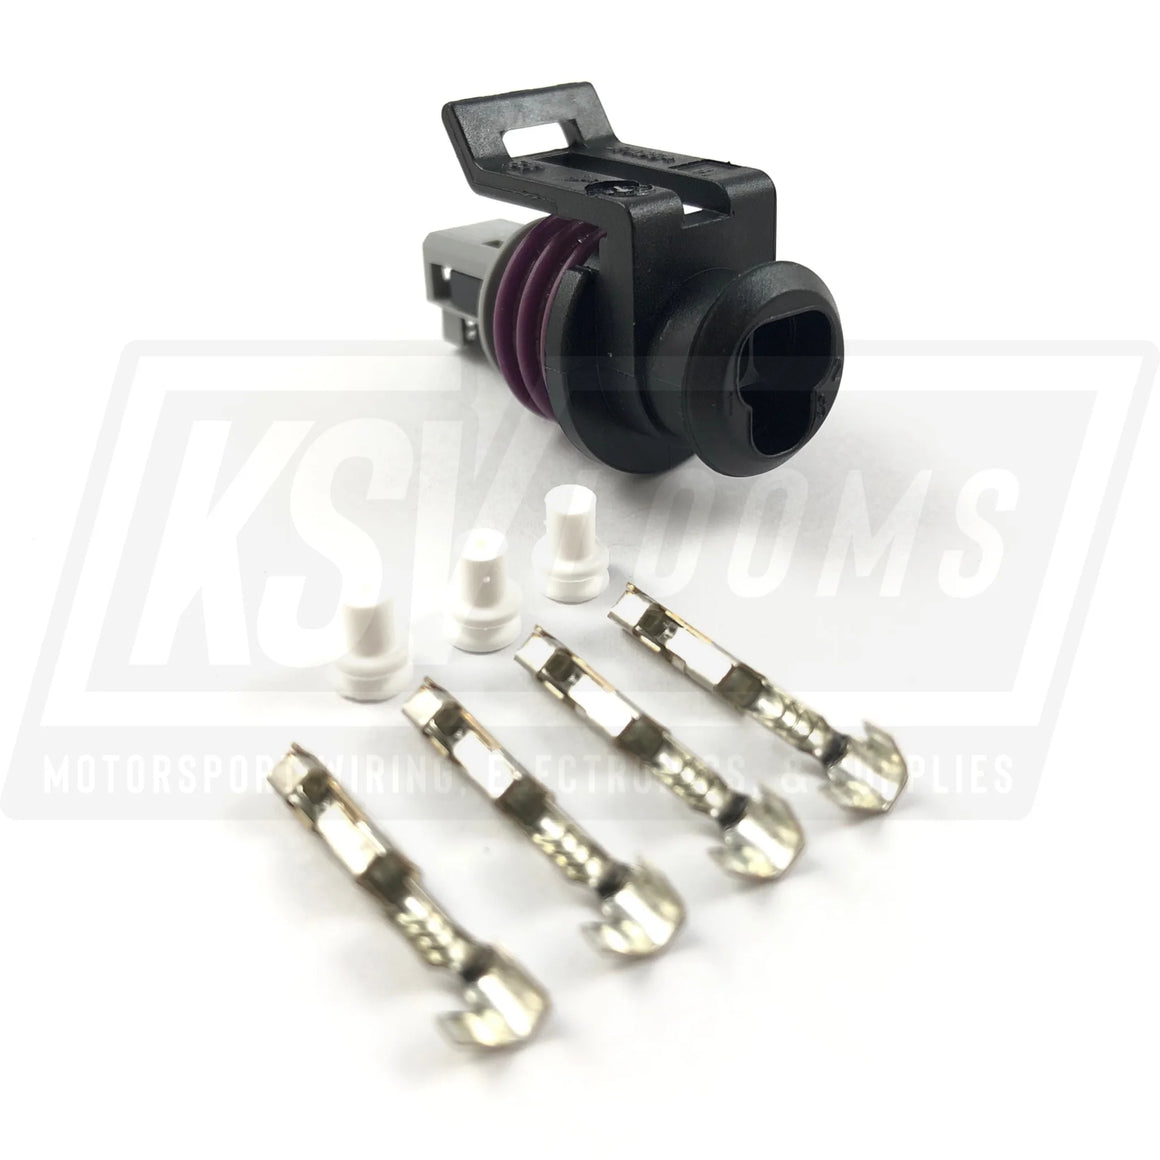 3-Way Connector Kit Fits Standard Sensor Th149 Throttle Position (22-20 Awg)